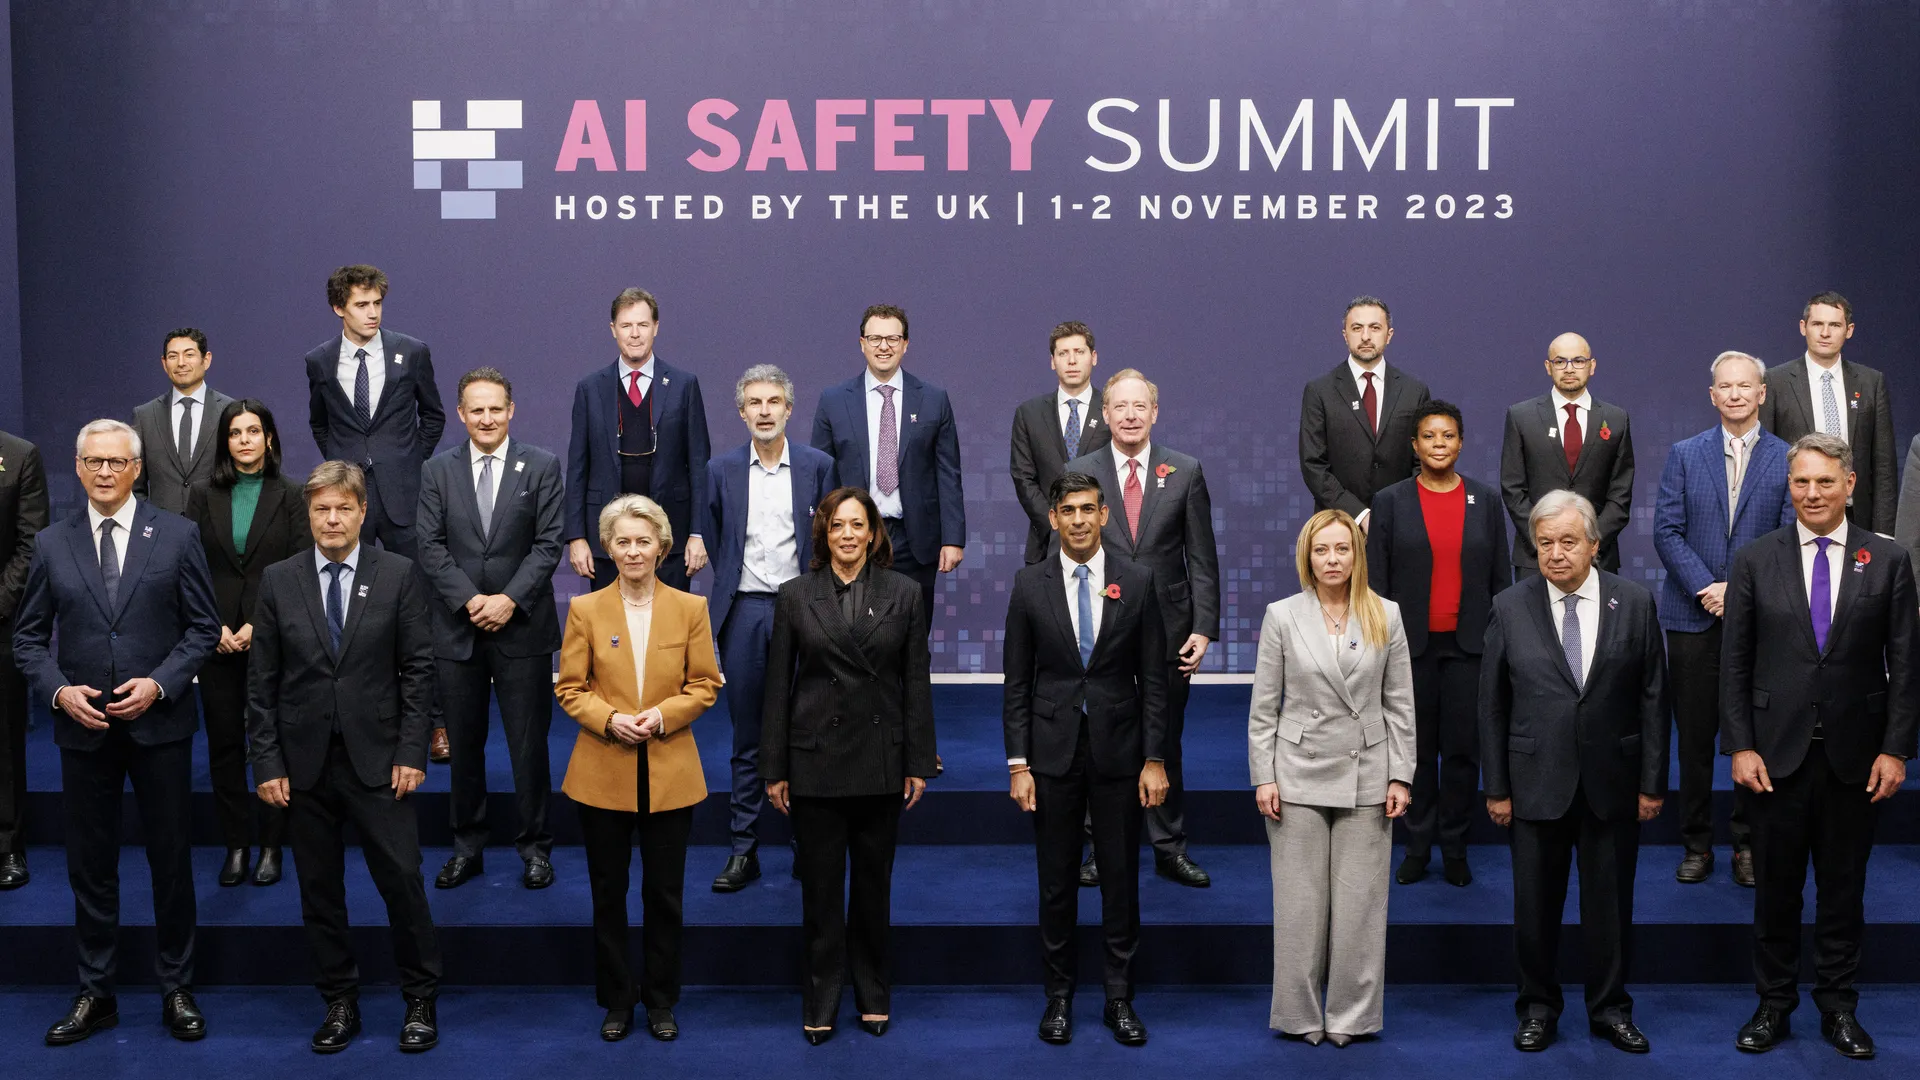 Leaders and speakers from the AI Safety Summit standing in a row.